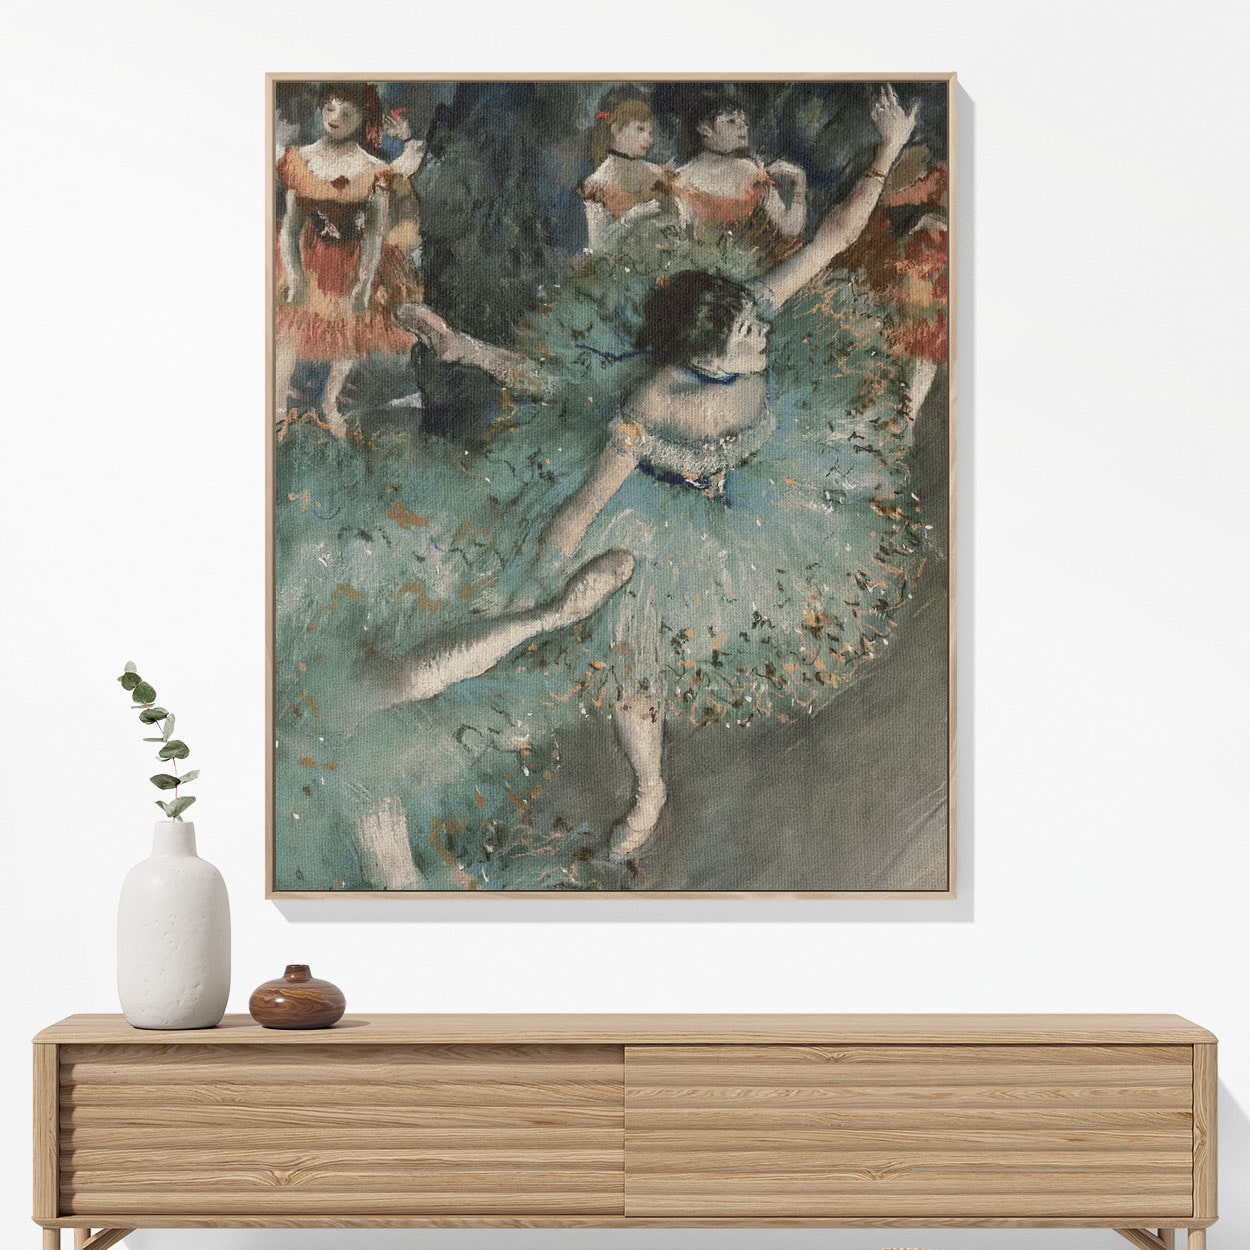 Ballet Painting Woven Blanket Woven Blanket Hanging on a Wall as Framed Wall Art